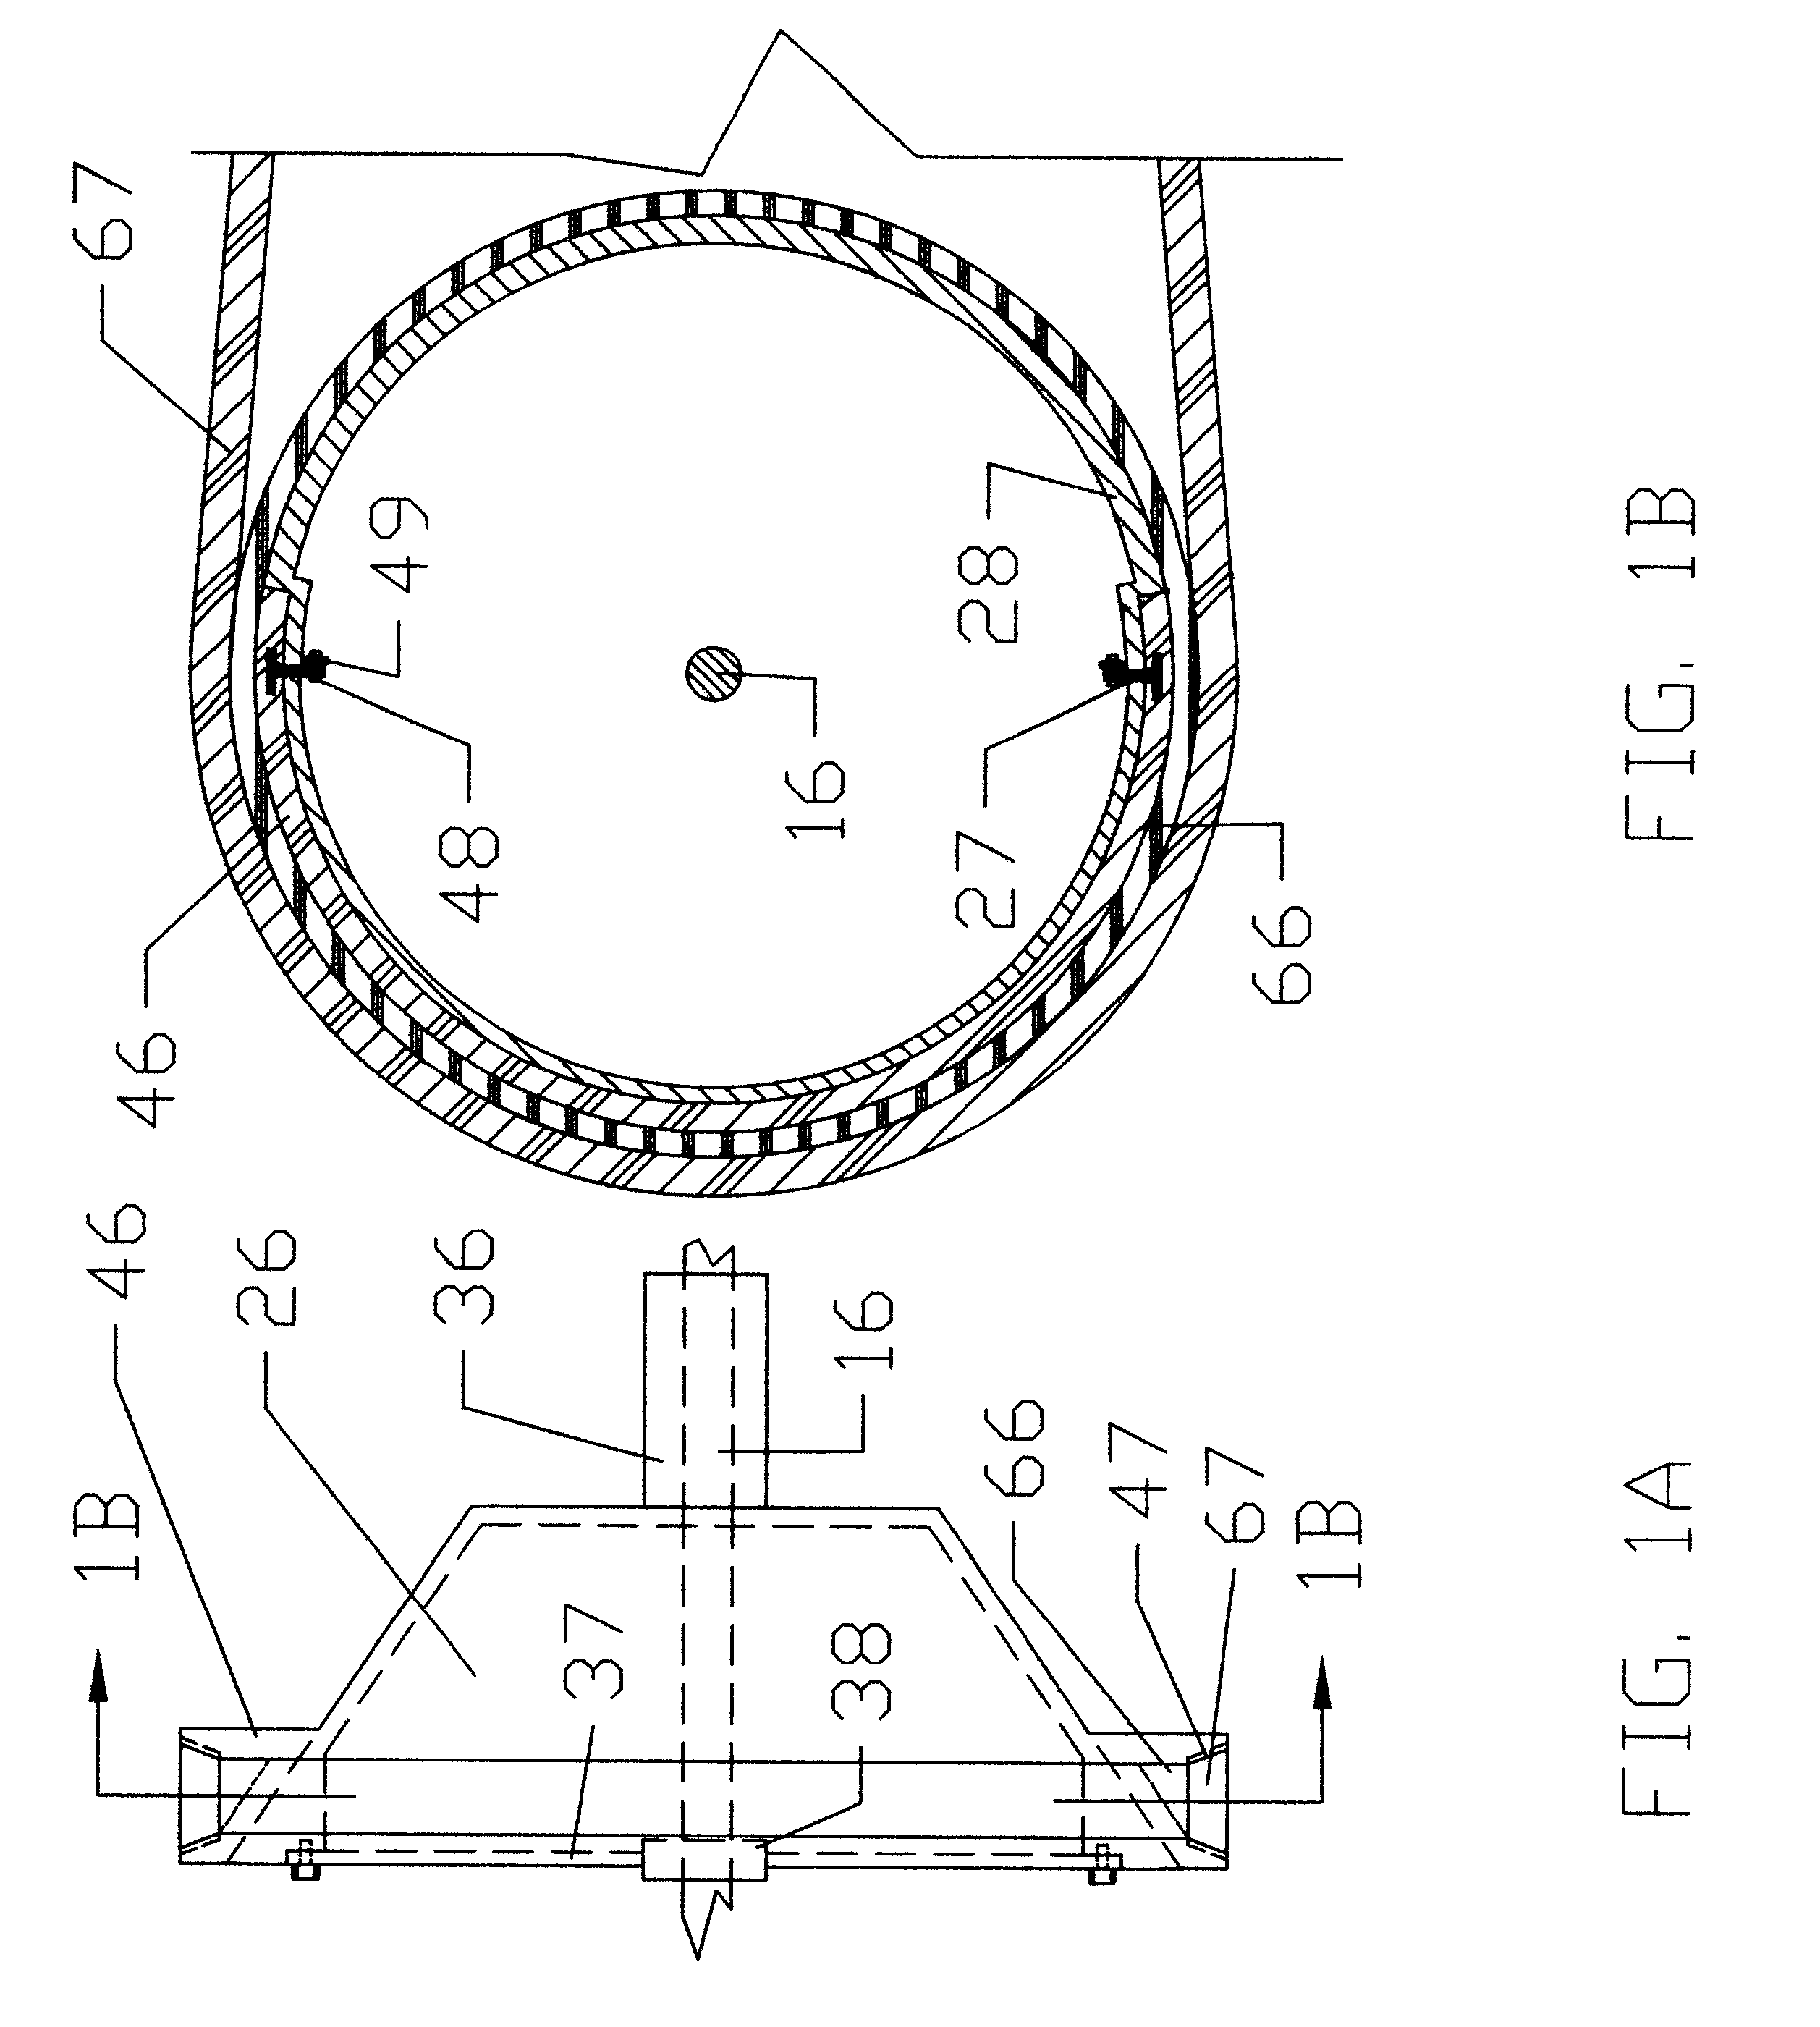 Cone with torque transmitting members for continuous variable transmissions